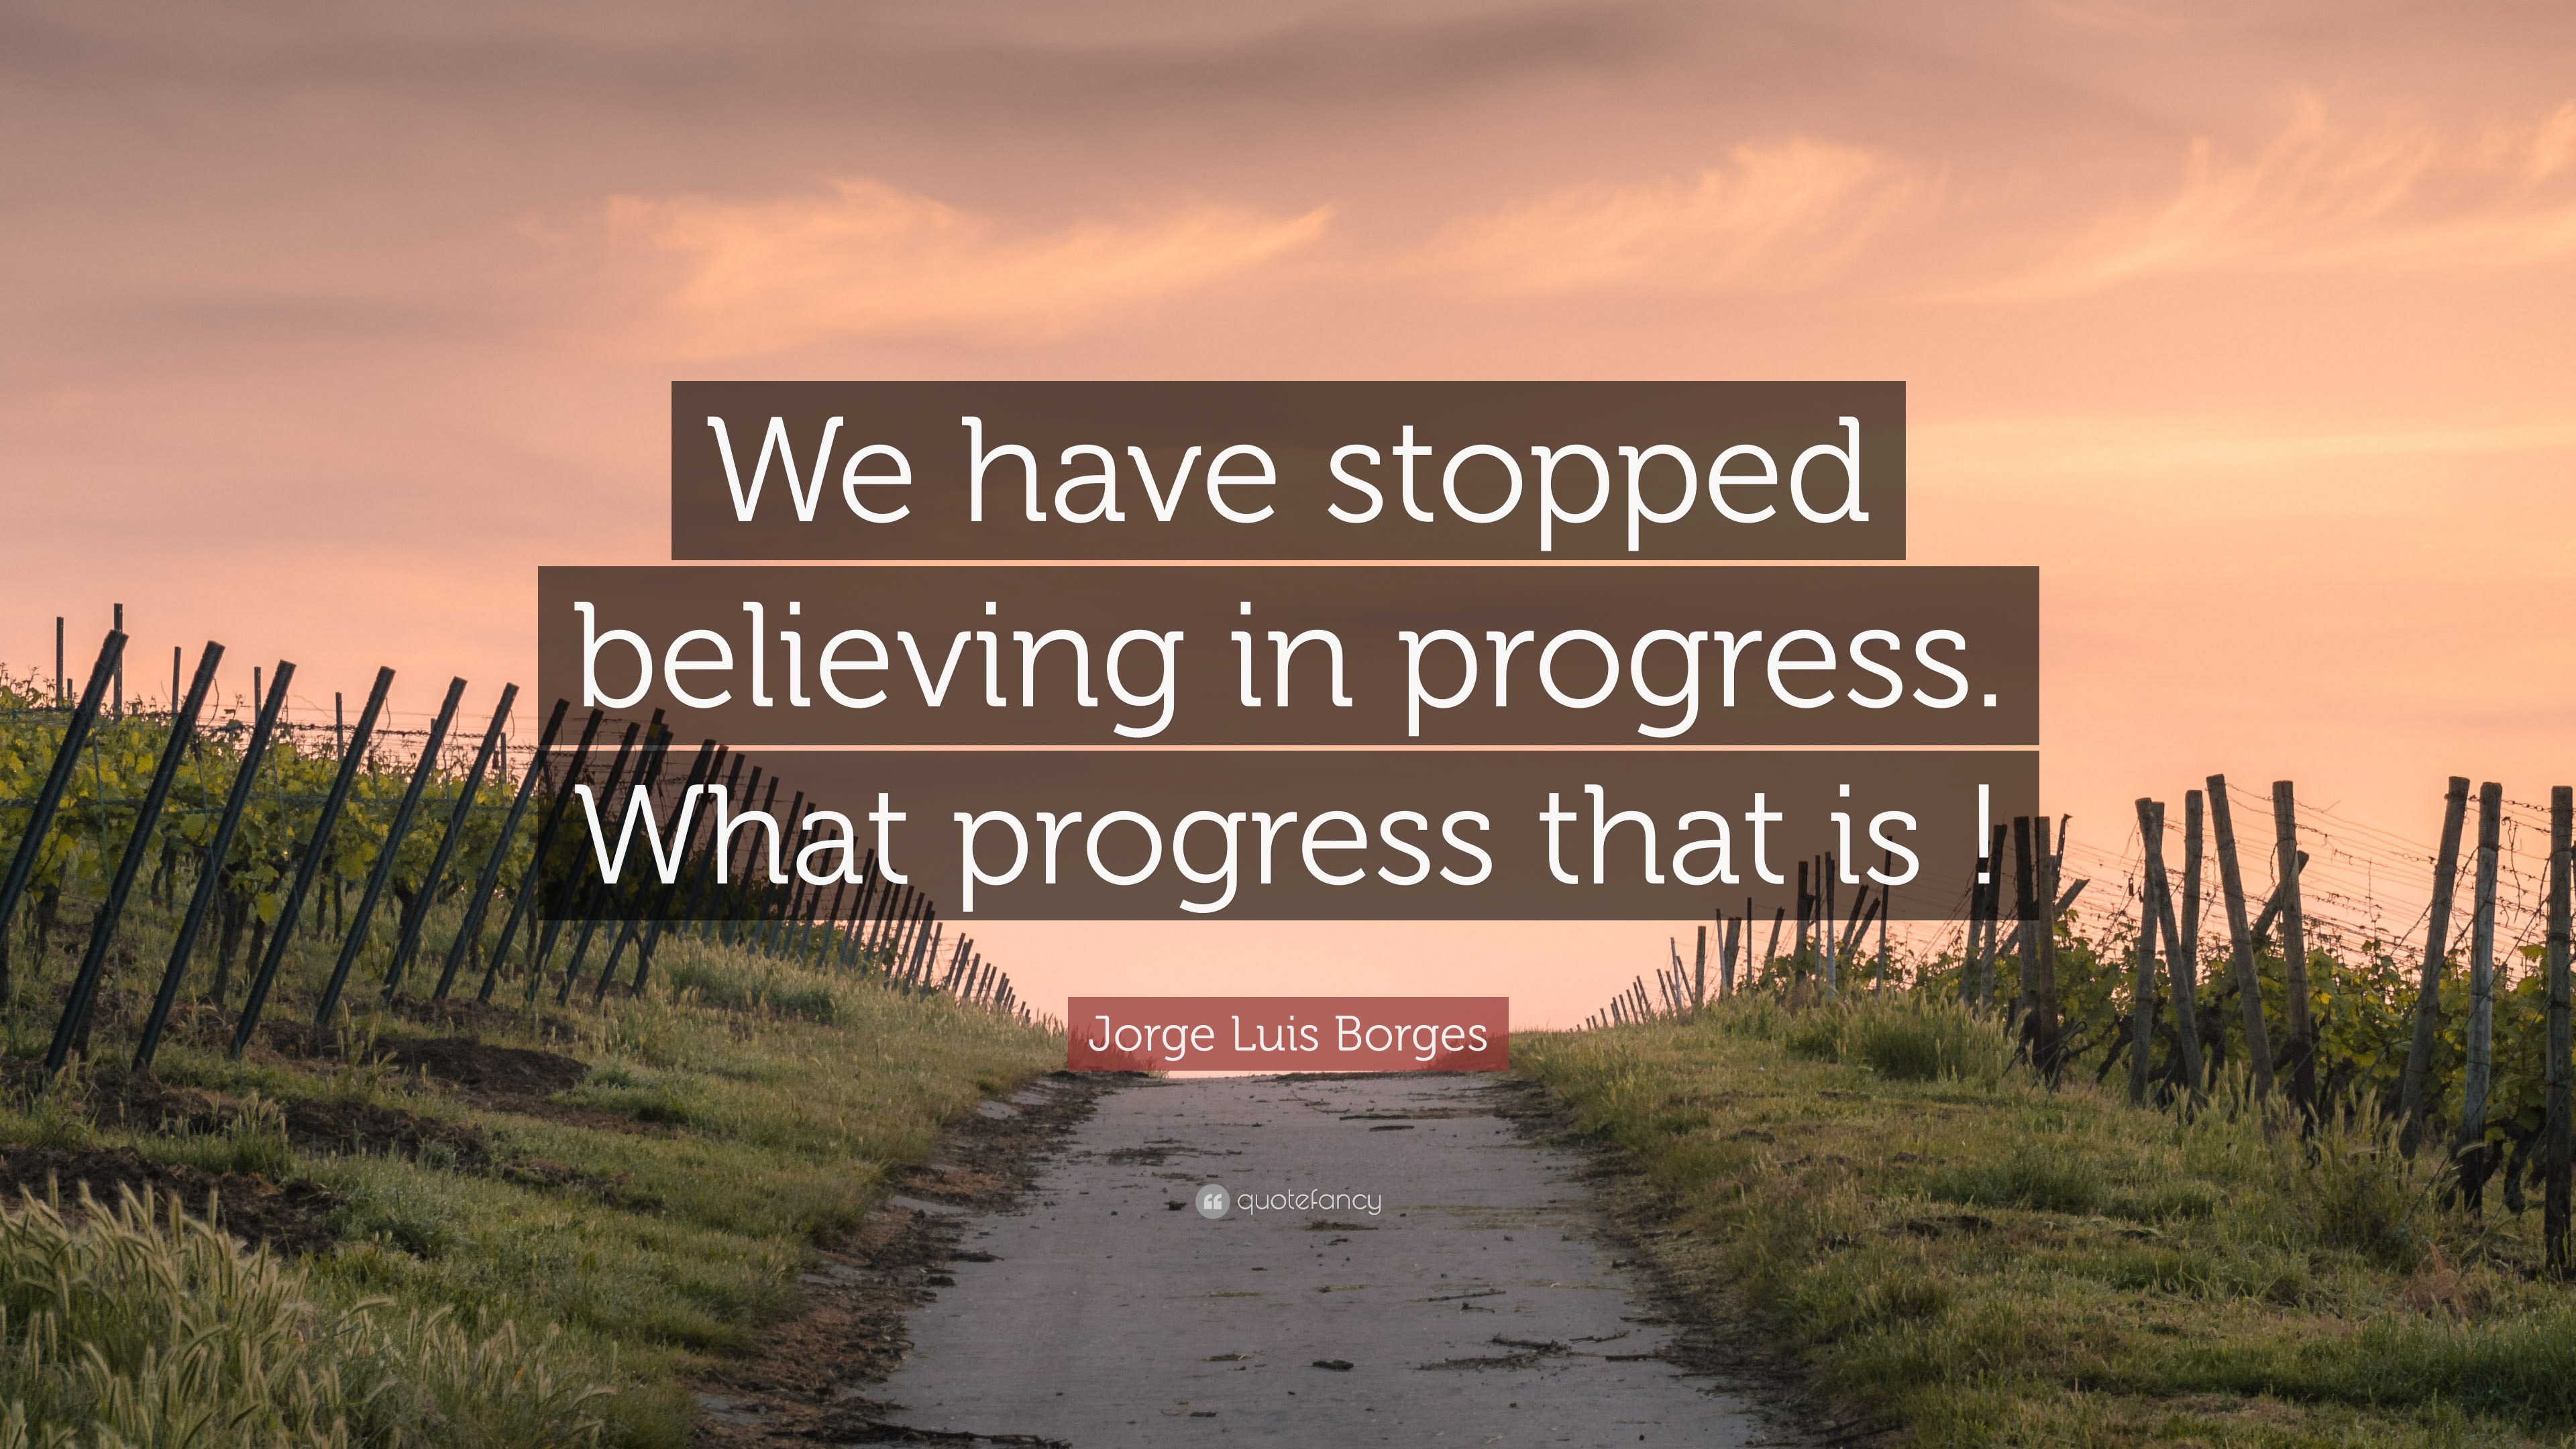 Jorge Luis Borges Quote: “We have stopped believing in progress. What ...